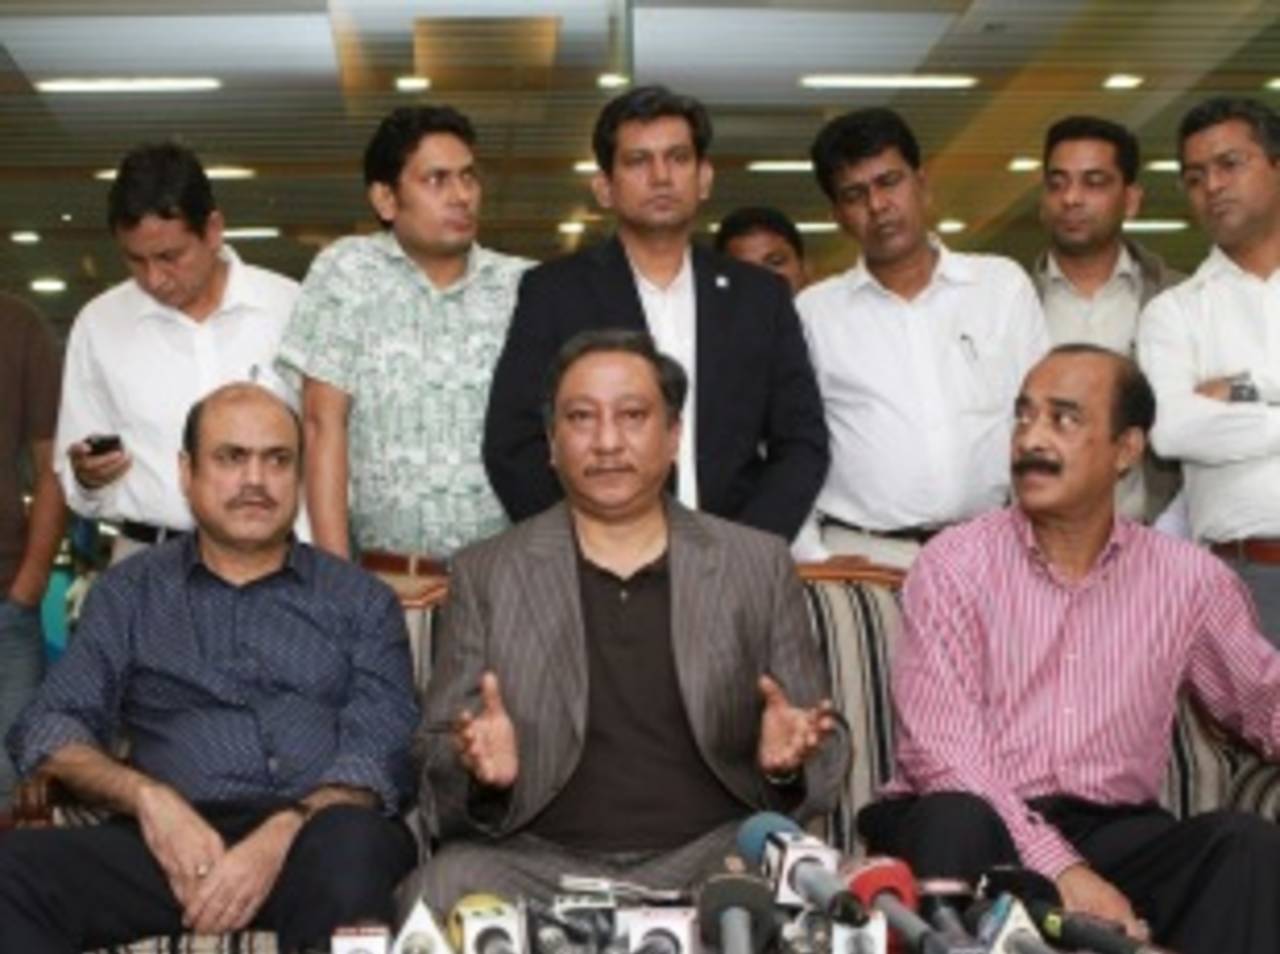 BCB president Nazmul Hassan said a date for the polls would be discussed at a board meeting on July 29&nbsp;&nbsp;&bull;&nbsp;&nbsp;BCB